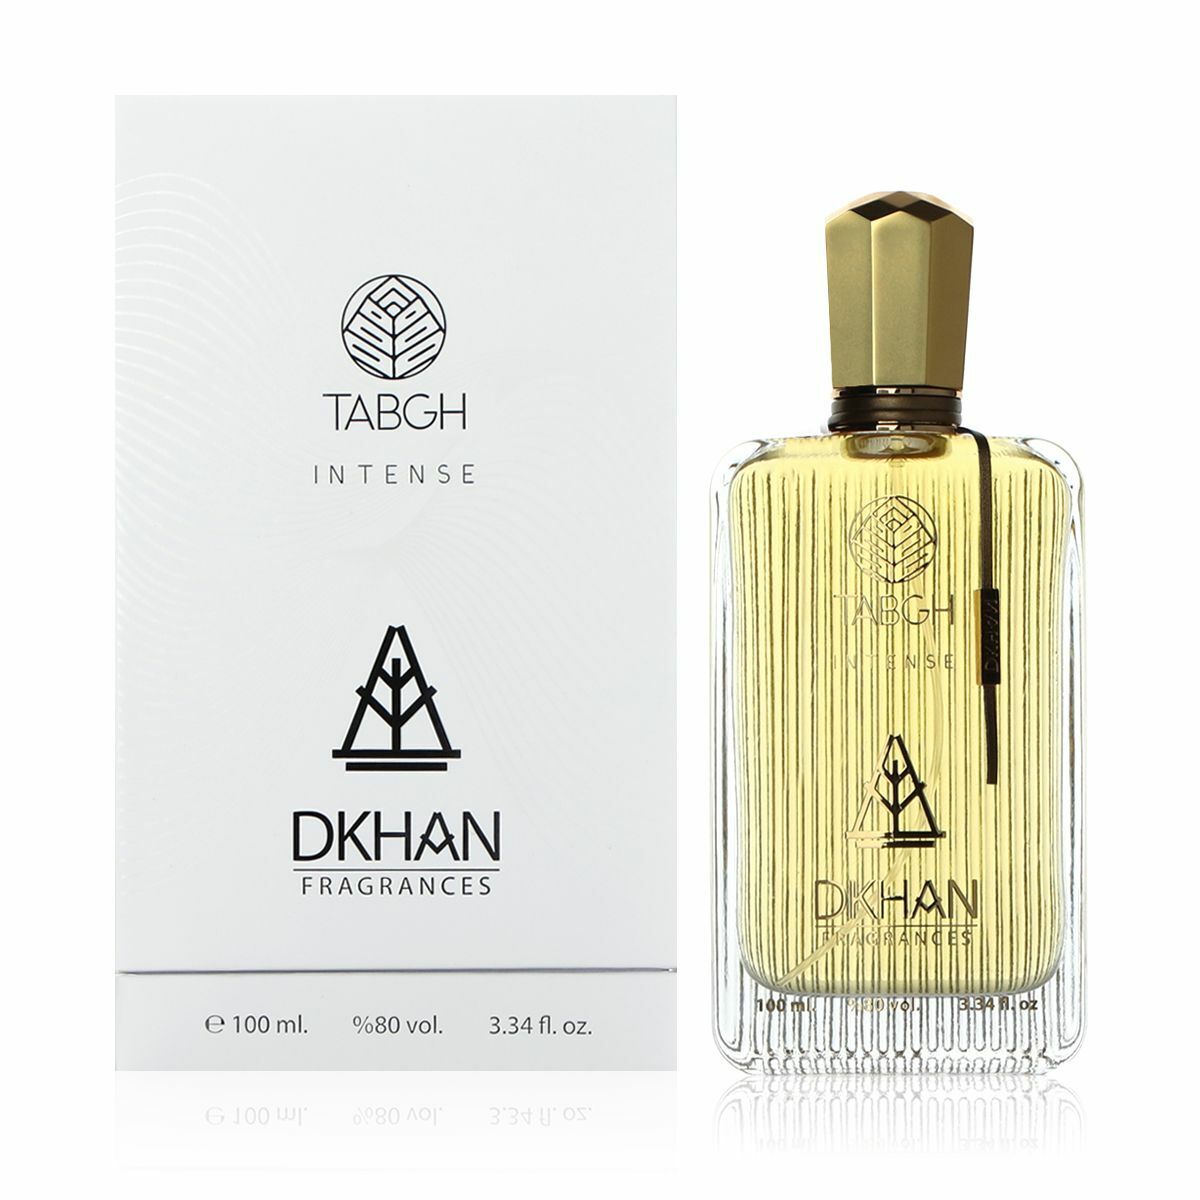 The image features an elegant, clear glass perfume bottle with vertical ridges and a golden-yellow fragrance inside, next to its white packaging box. The box and bottle both have the "TABGH INTENSE" branding and the "DKHAN FRAGRANCES" emblem prominently displayed. A geometric leaf-like logo is visible above the text on both items. The bottle has a gold-colored cap and a black vertical label on the right side.